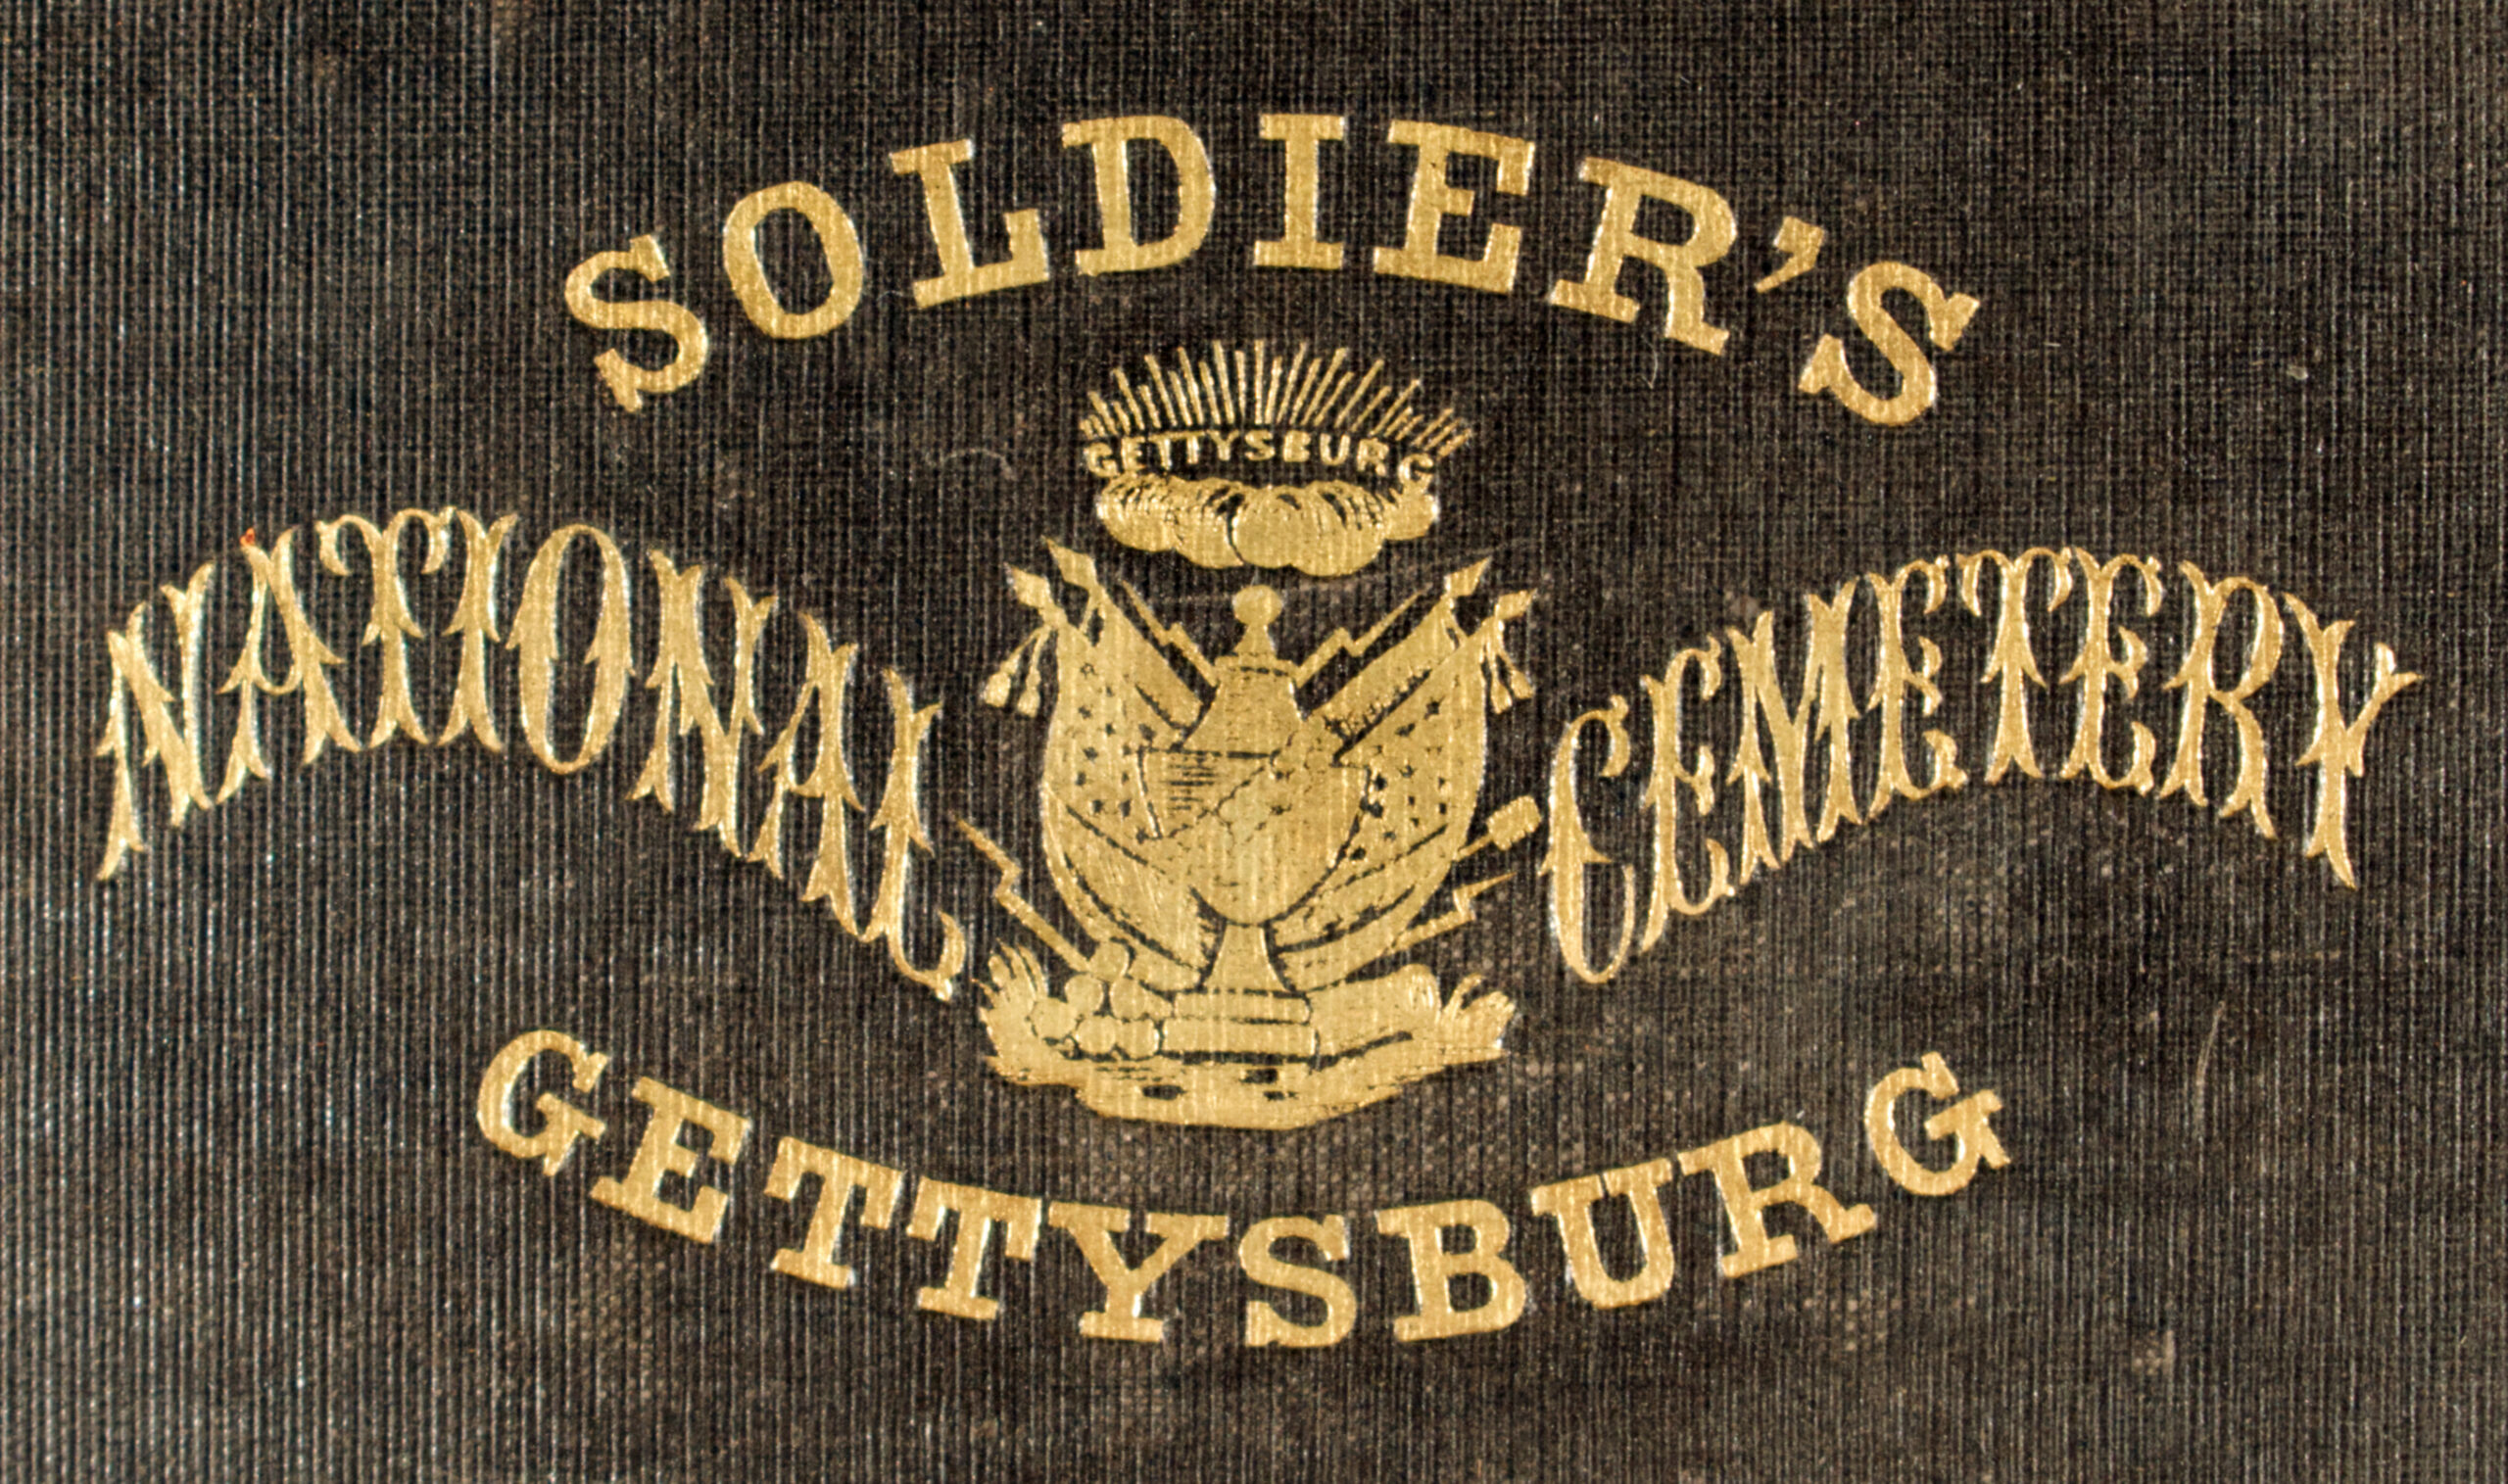 Report of the Select Committee Relative to the Soldiers’ National Cemetery, together with the accompanying documents, as reported to the House of Representatives of the Commonwealth of Pennsylvania, March 31, 1864. Harrisburg: Singerly & Myers, state printers, 1864.